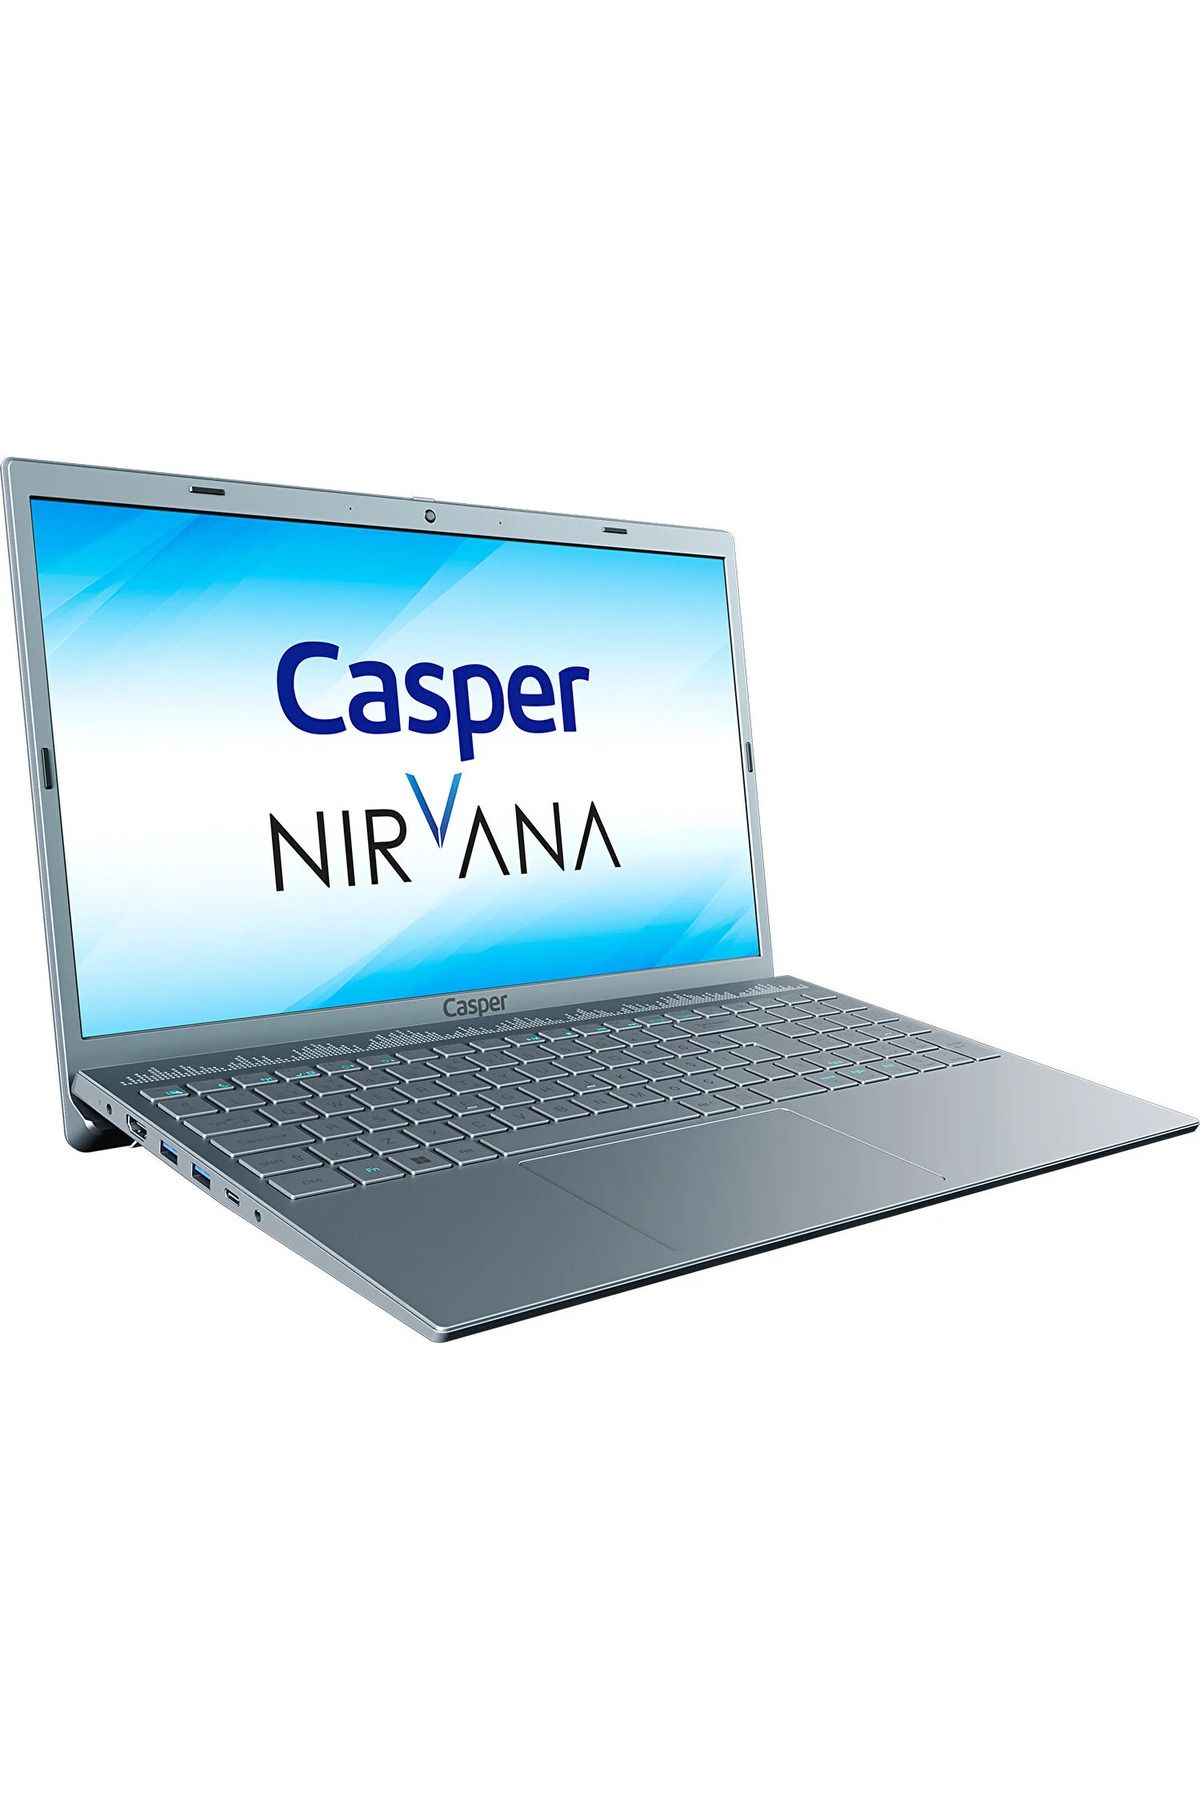 Casper Nirvana C500.1155-BF00P-G-F i5-1155G7 16 GB 1 TB SSD Iris Xe Graphics 15.6" Full HD Notebook